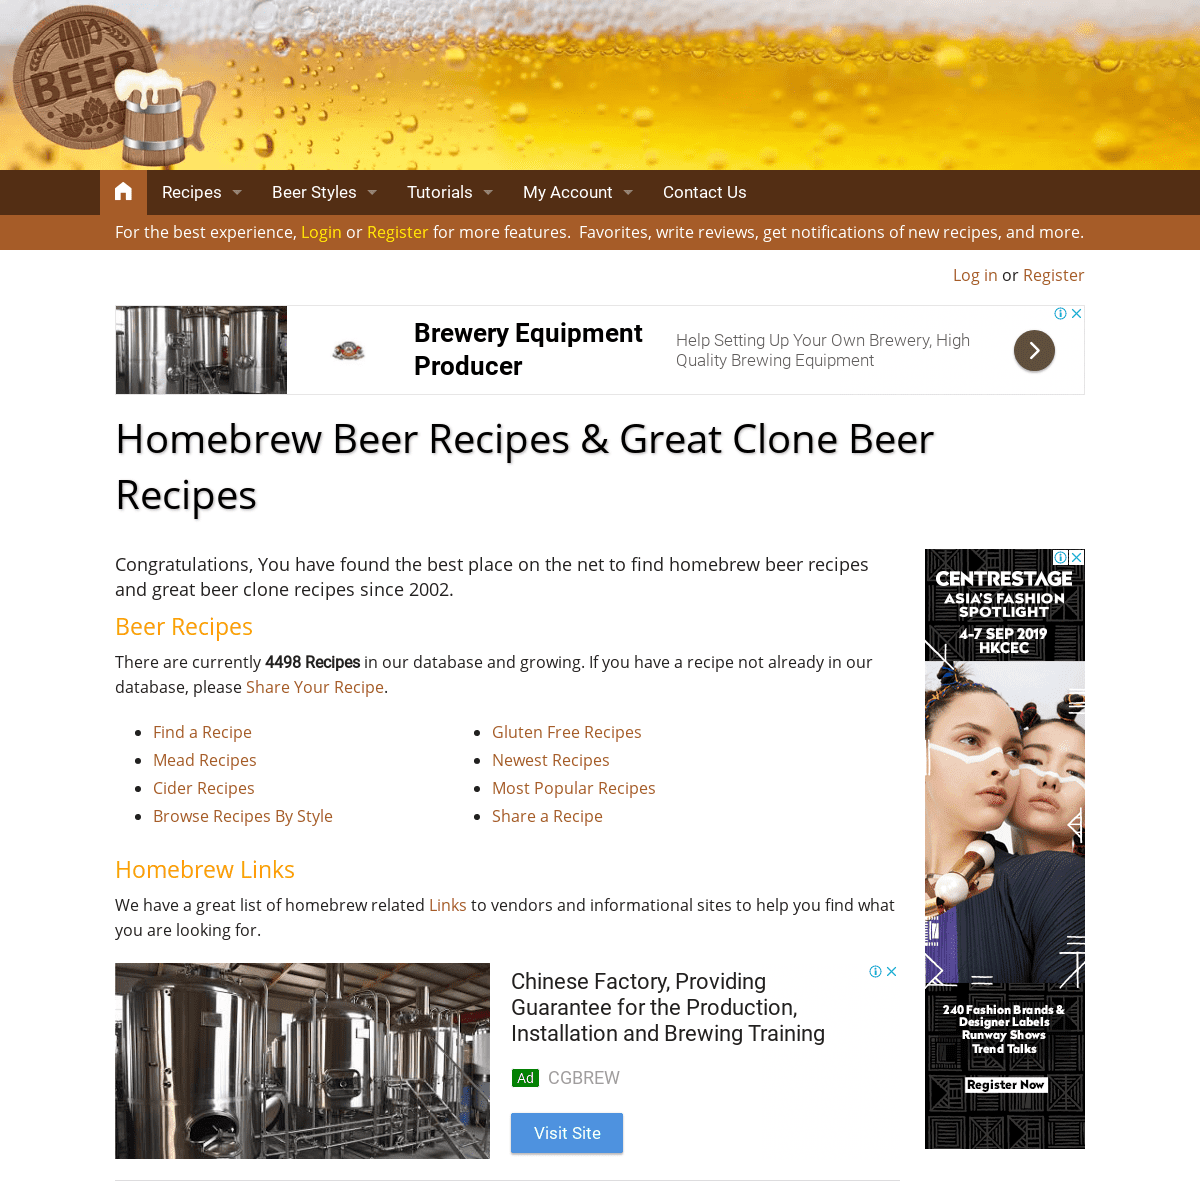 Homebrew Beer Recipes and Great Beer Clone recipes. All-Grain, Extract